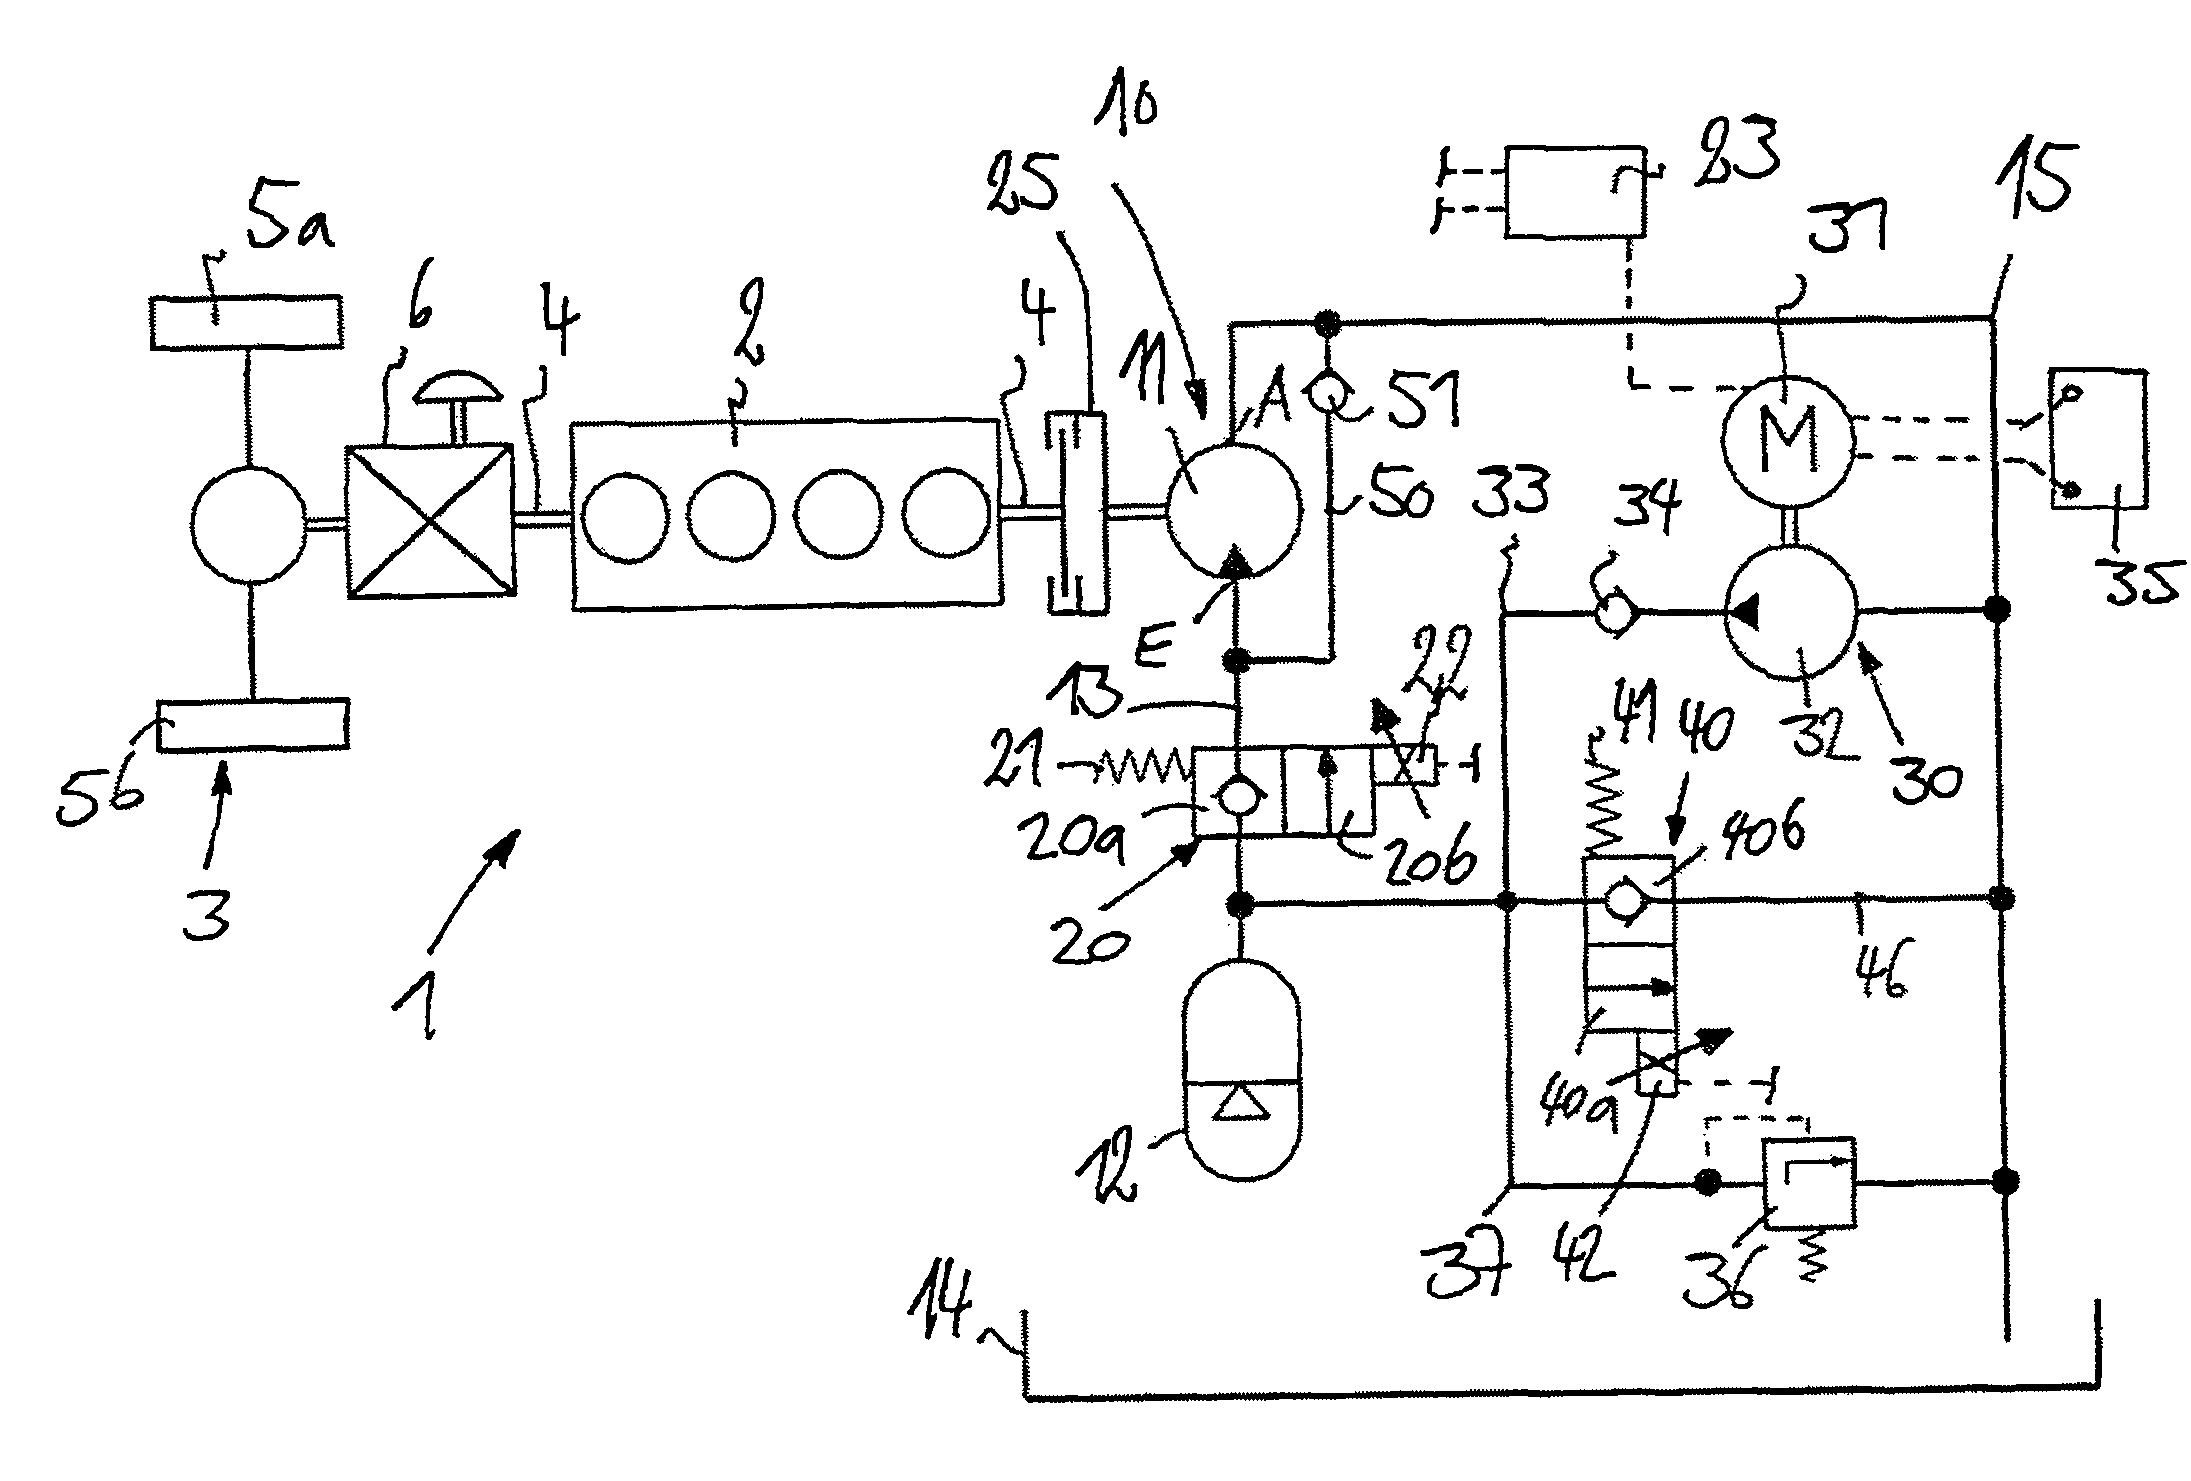 Hydrostatic starter device of an internal combustion engine